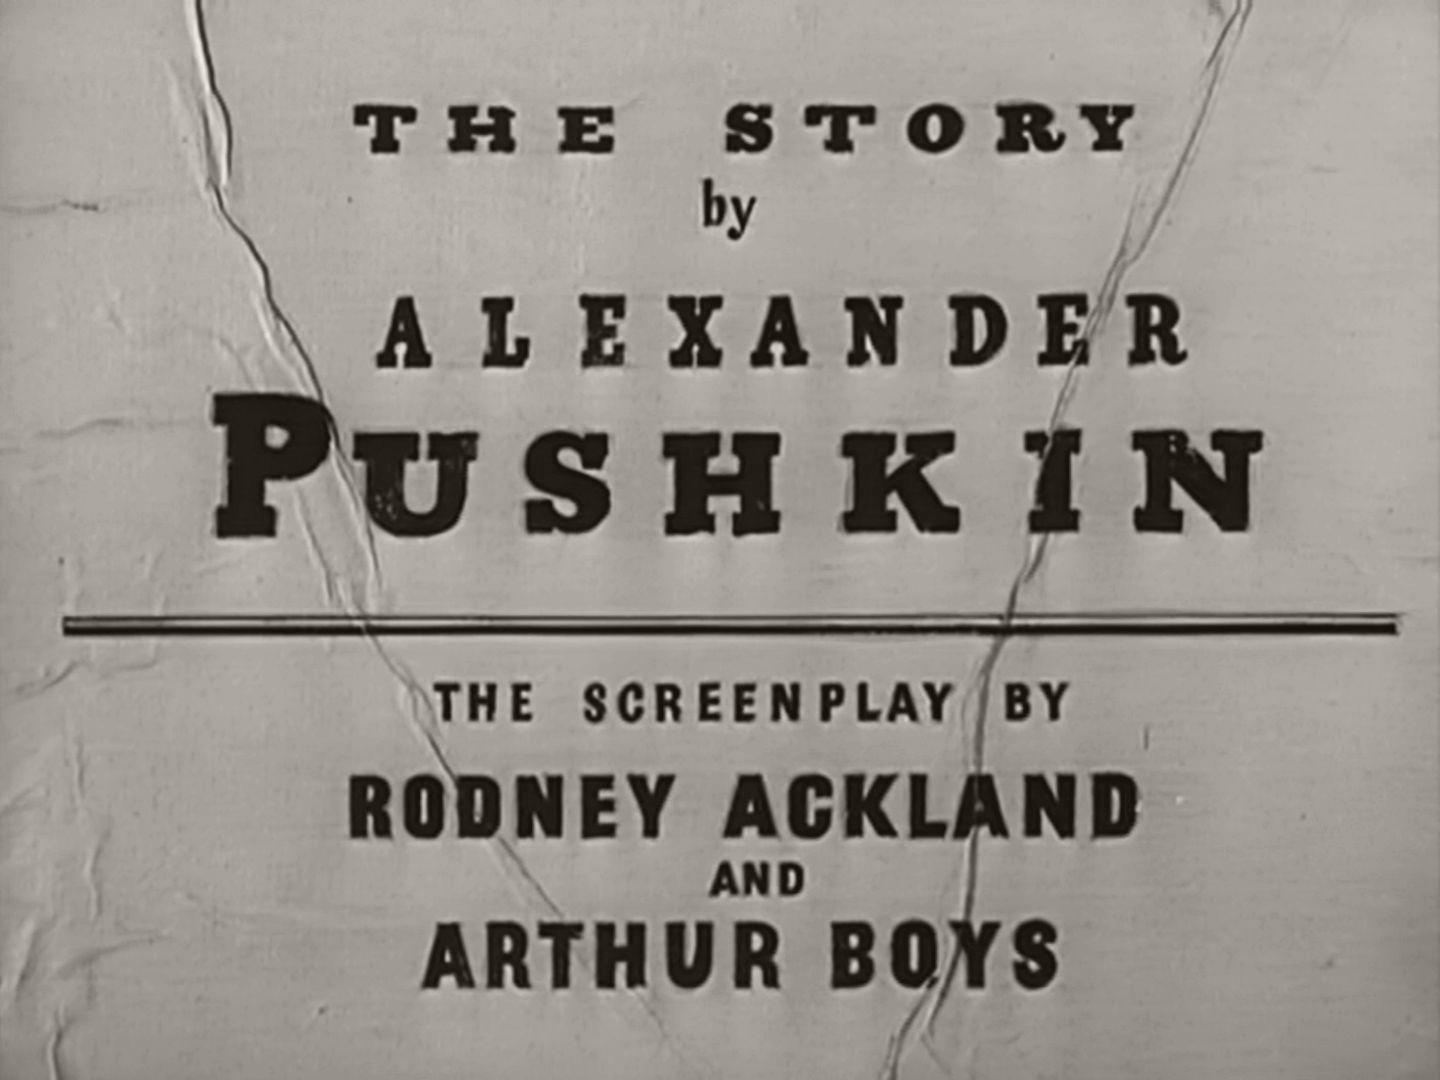 Main title from The Queen of Spades (1949) (6). The story by Alexander Pushkin. The screenplay by Rodney Ackland and Arthur Boys